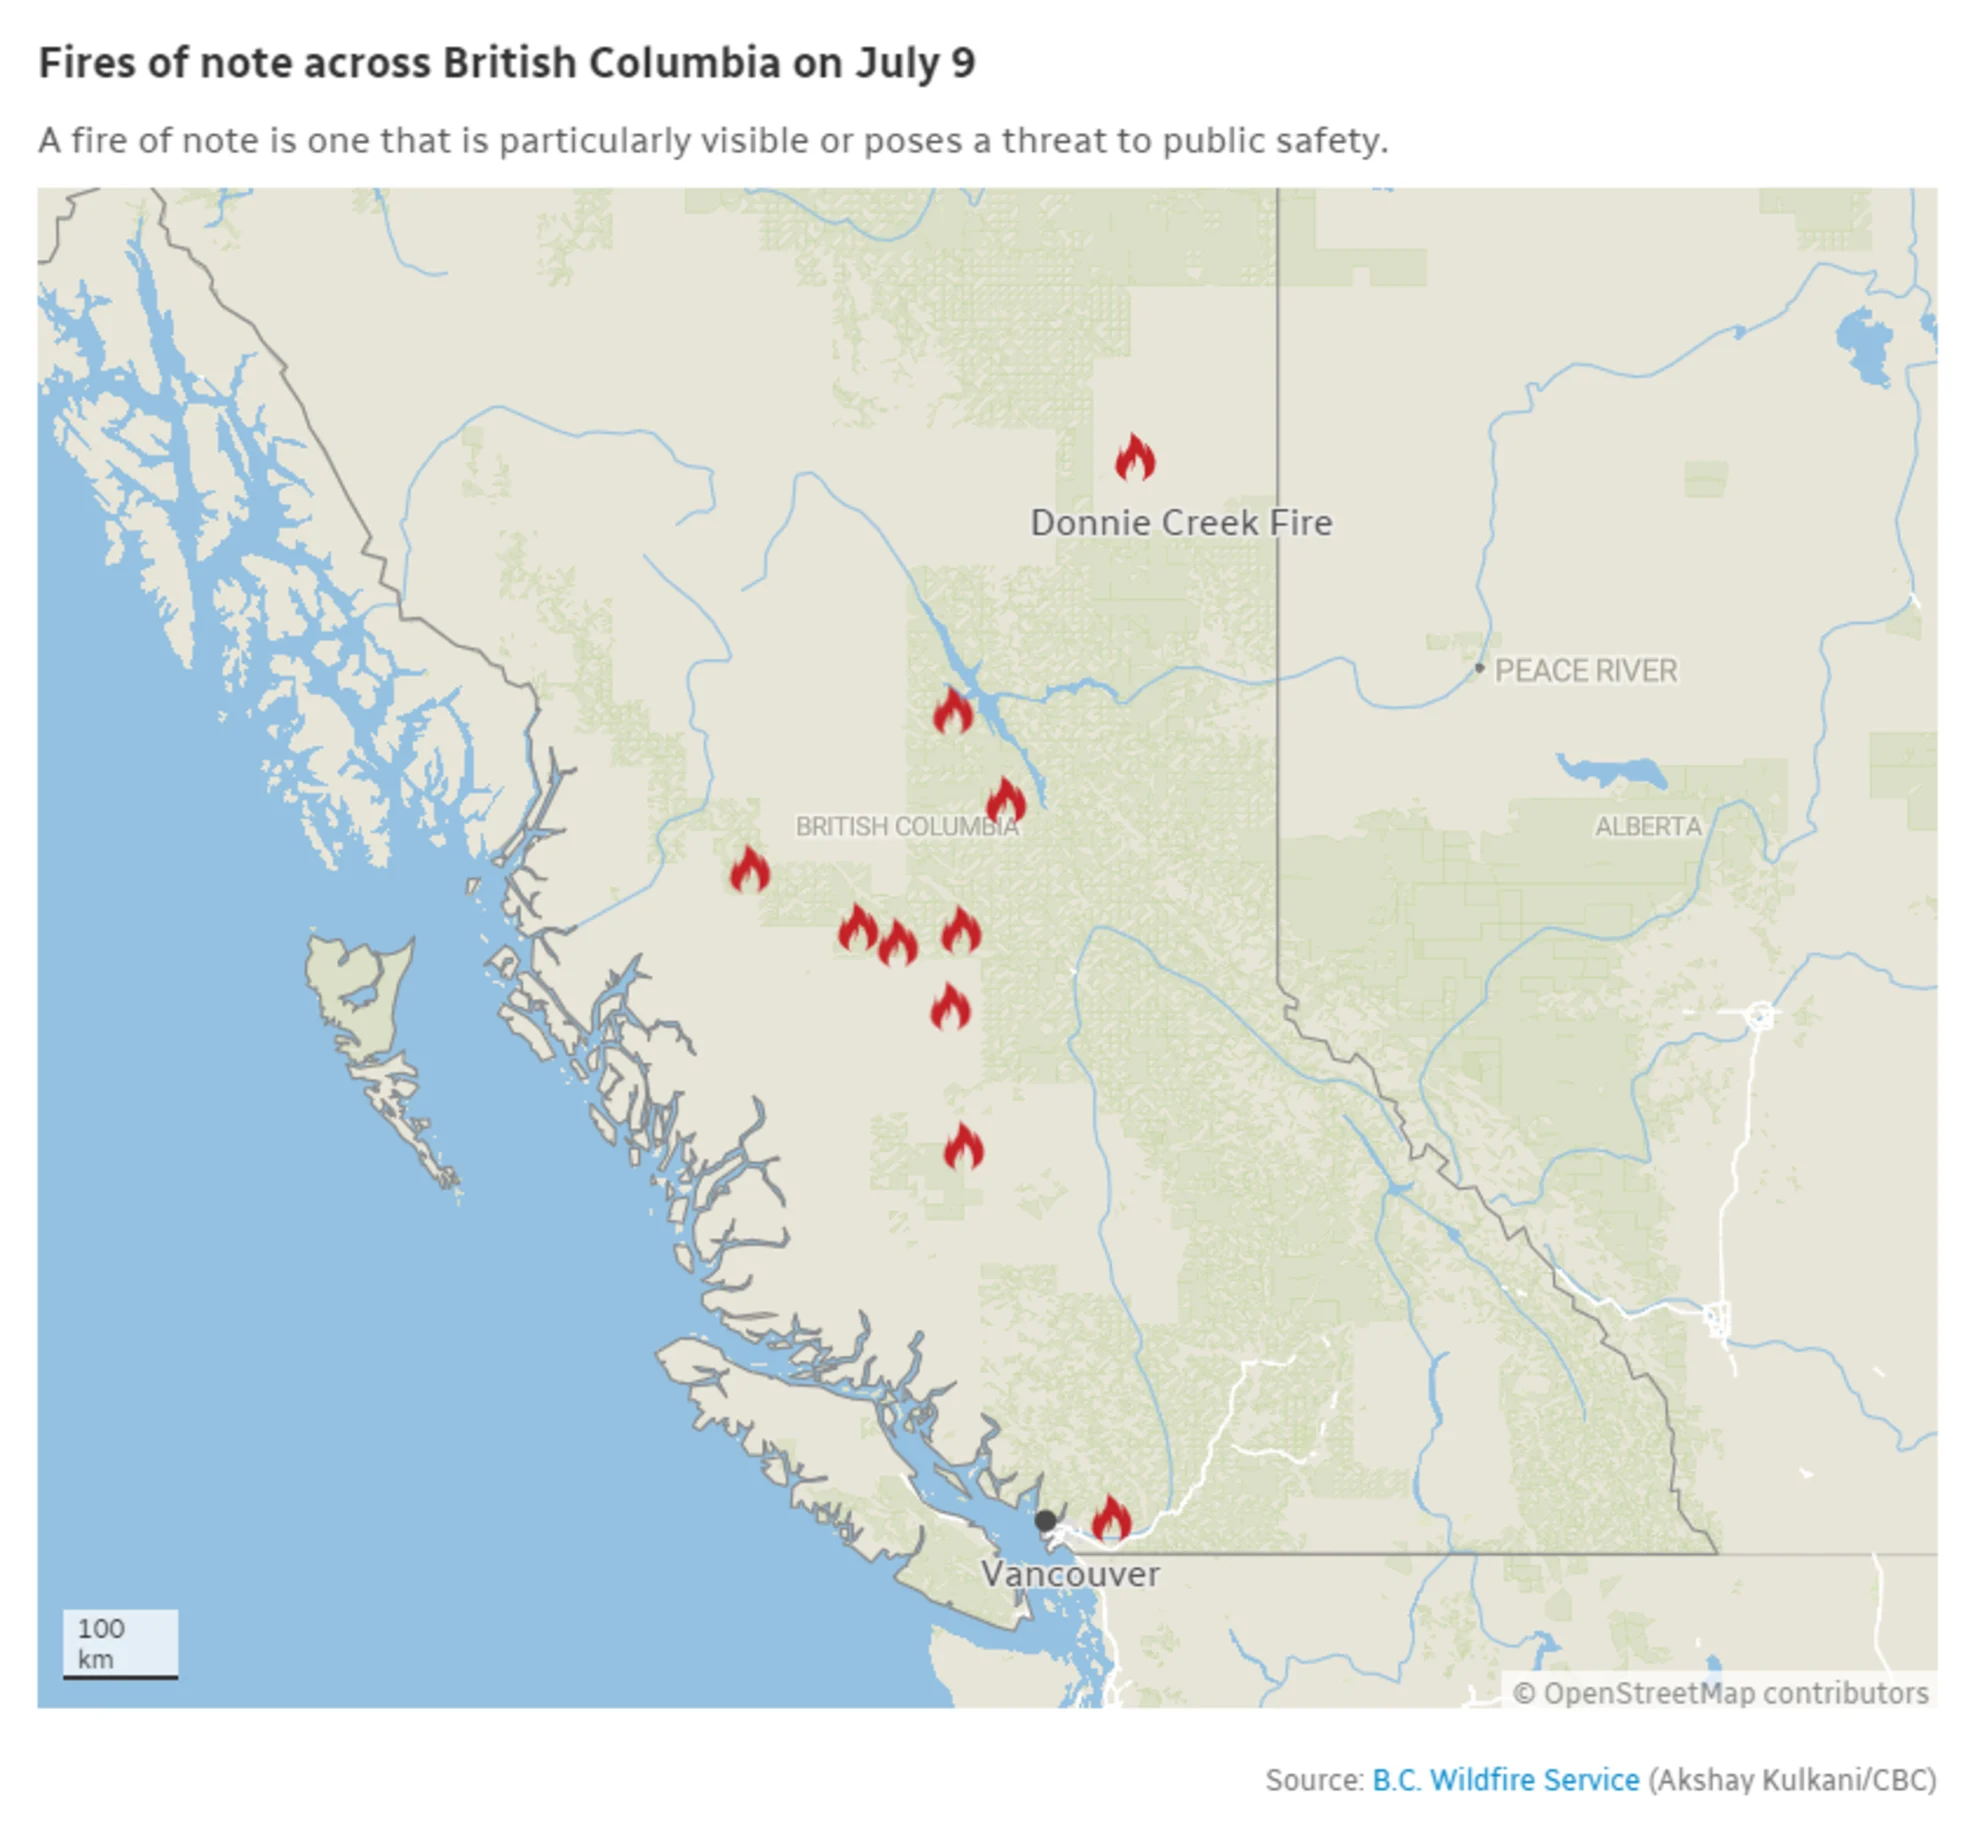 CBC - BC fires of note - July10